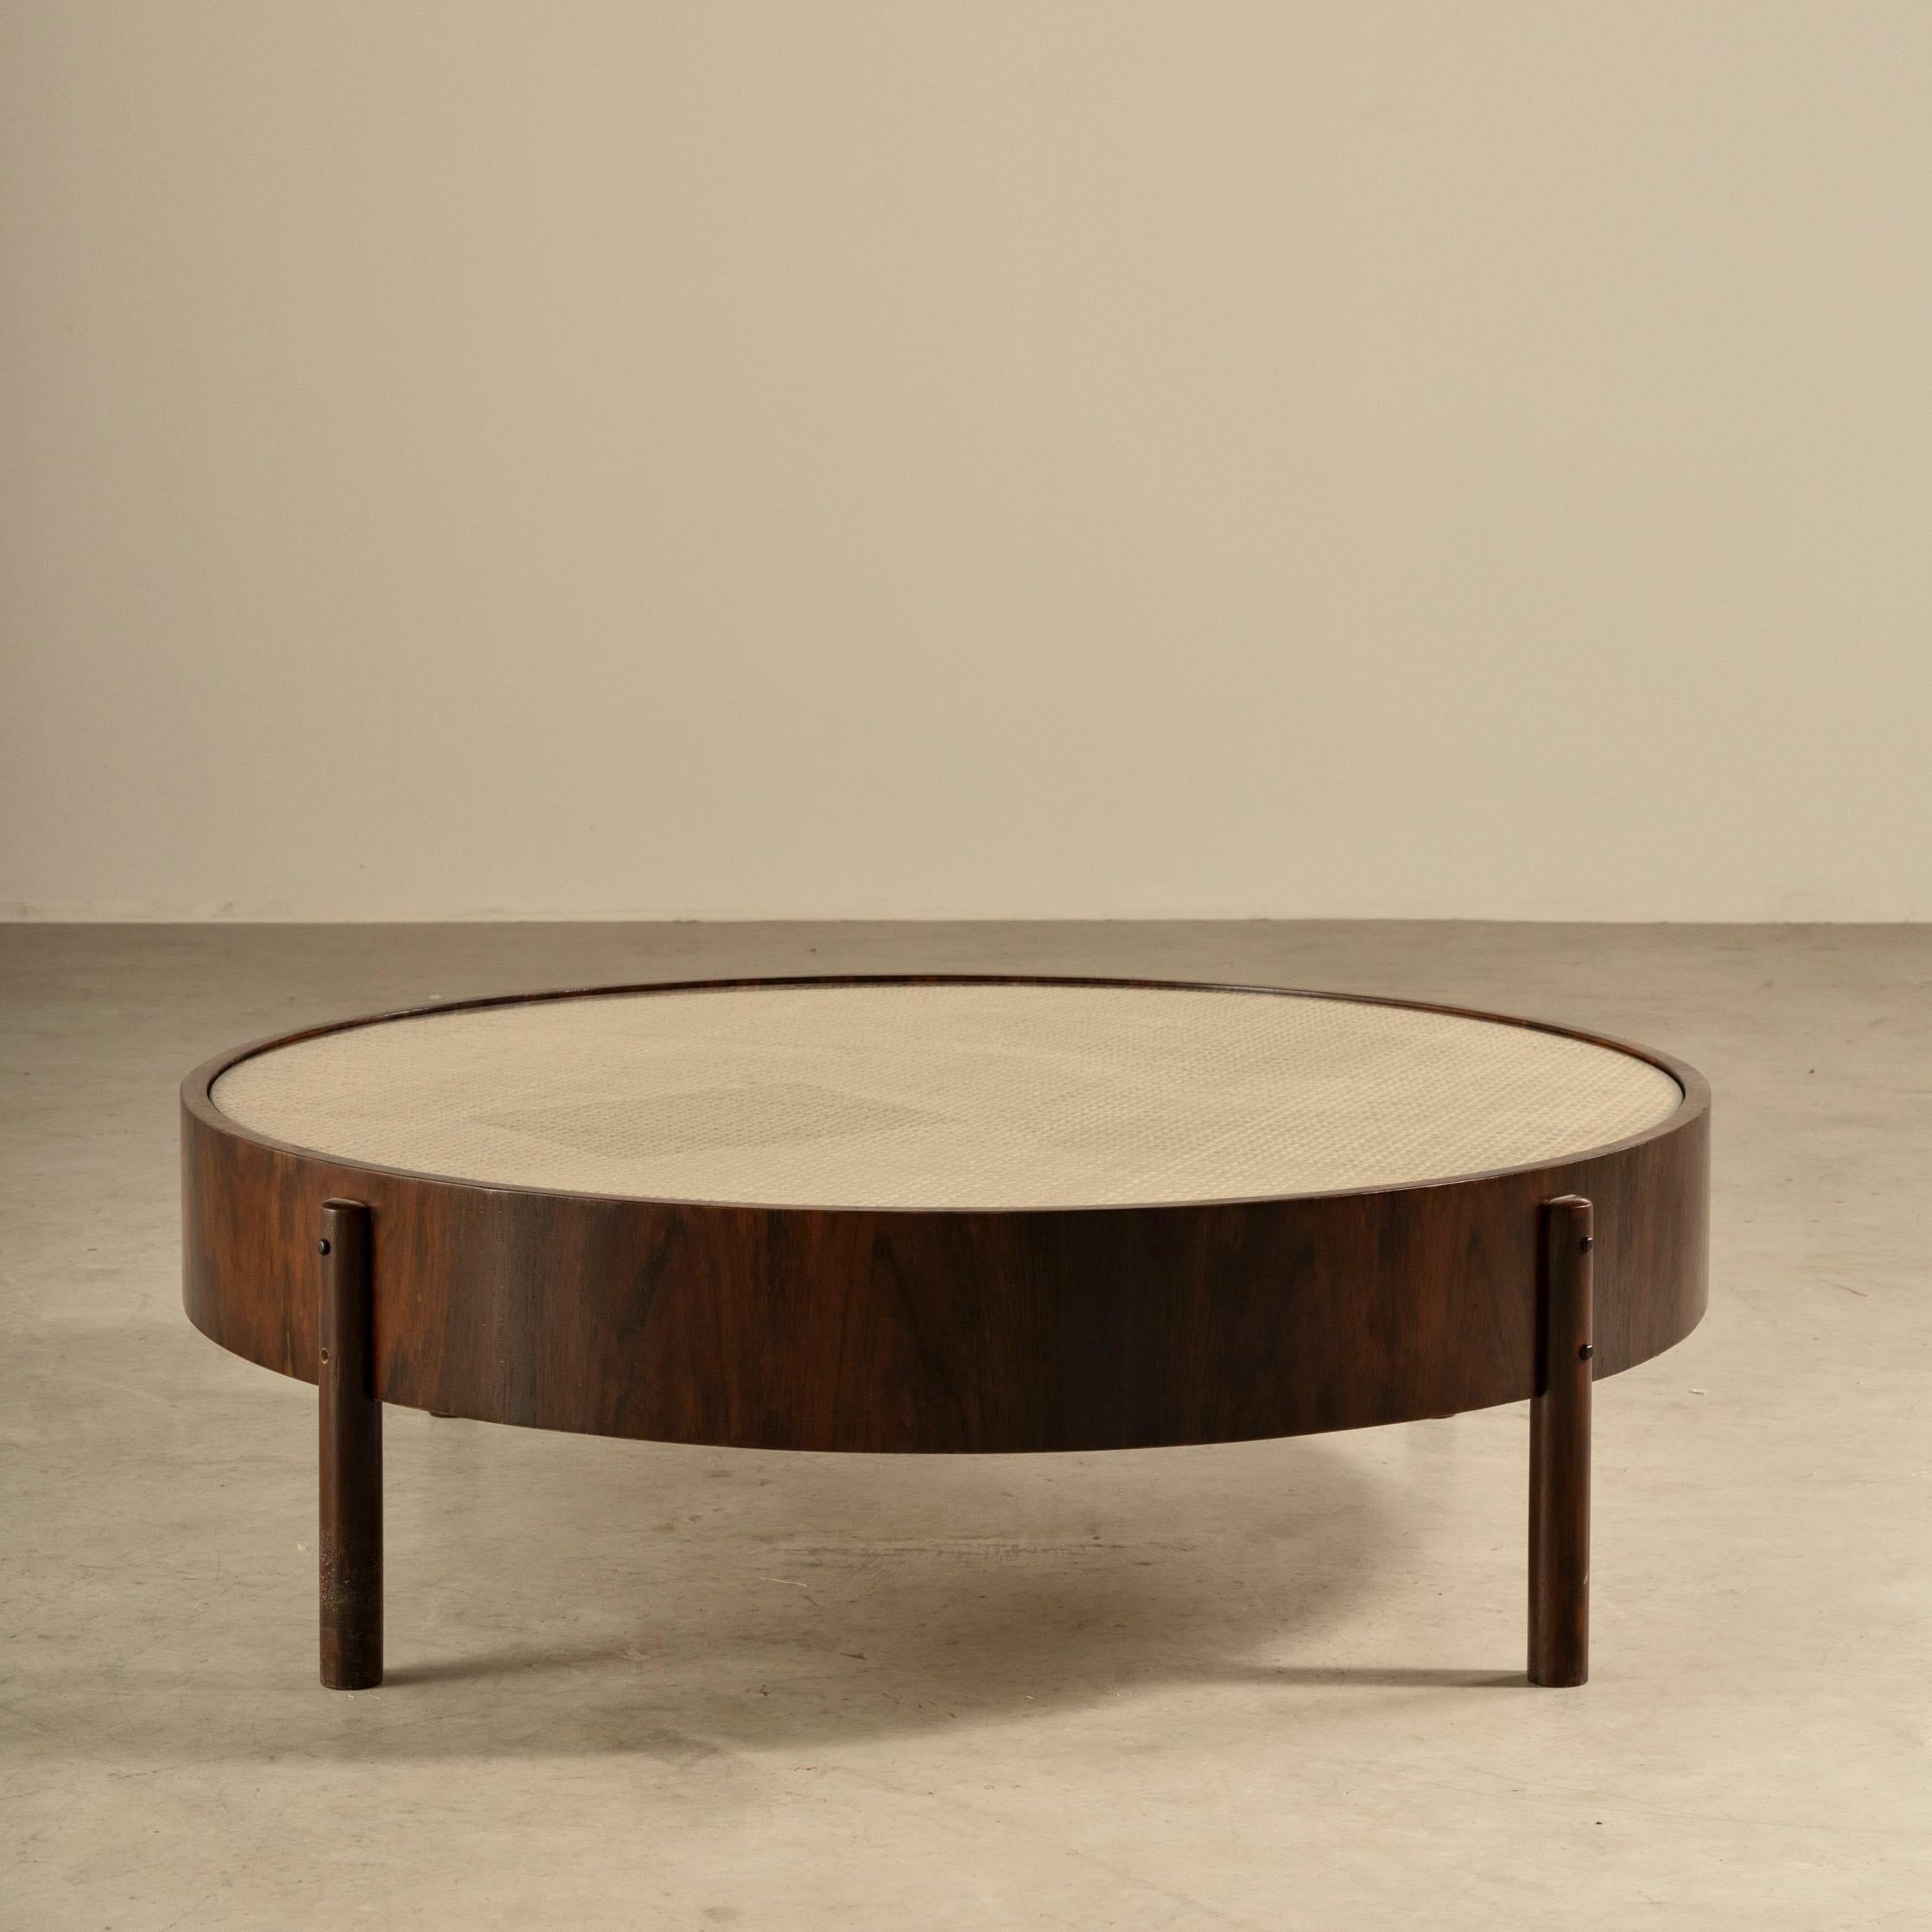 The Adi table is a truly stunning piece, expertly crafted to evoke the spirit of Brazilian midcentury design. The simple lines and minimalistic design give this table a timeless quality that will look beautiful in any decor. What really sets the Adi